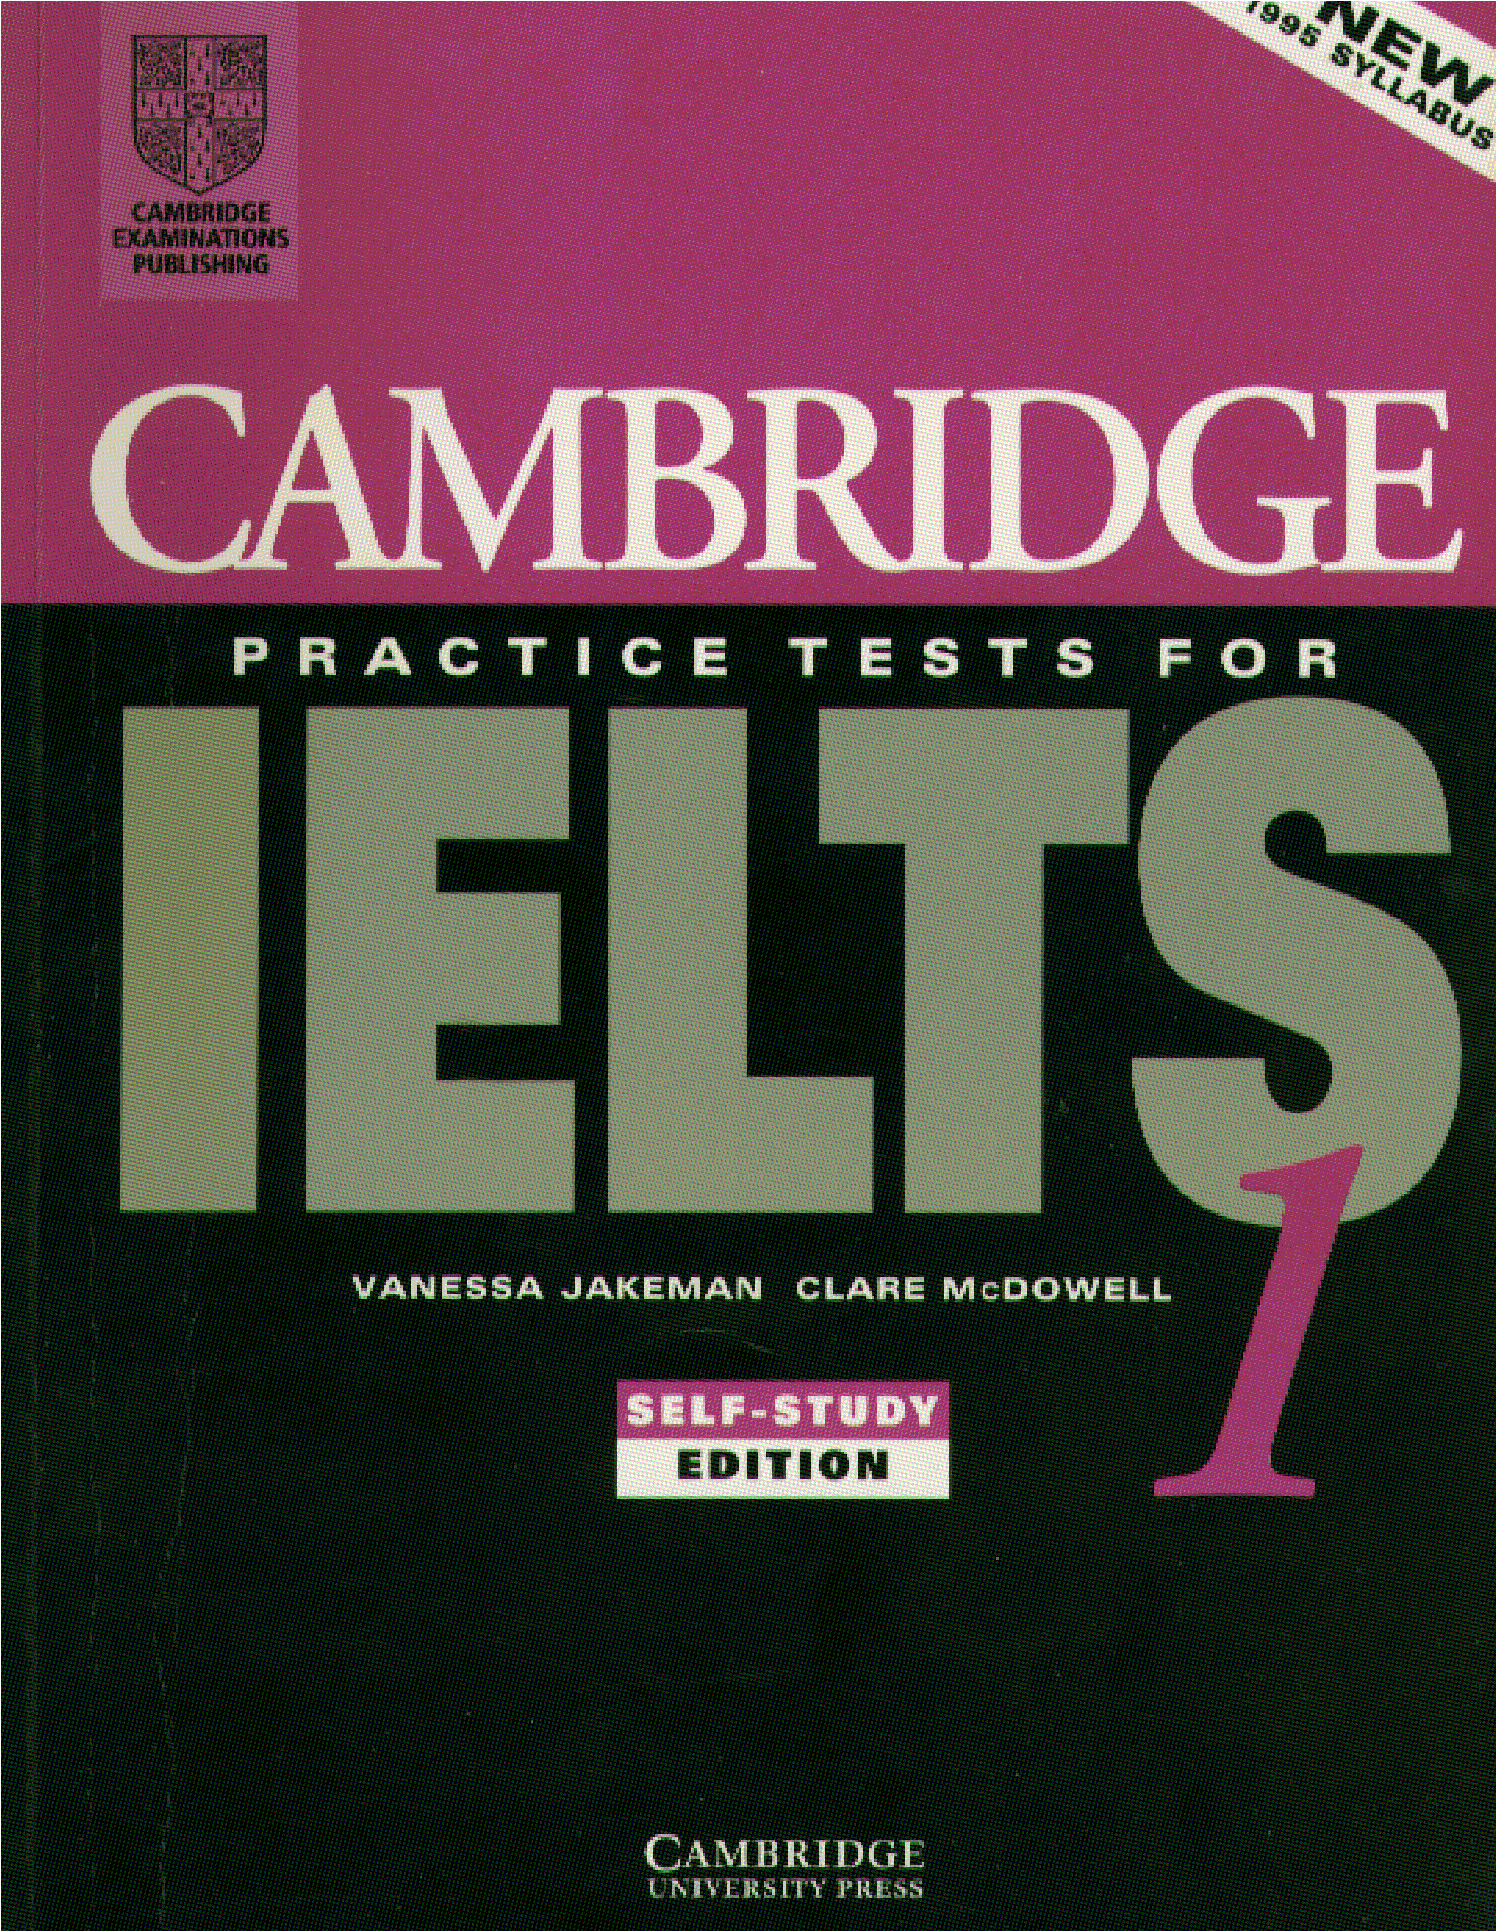 English test book. IELTS Test Practice book Test 1. Cambridge Practice Tests for IELTS 1. Cambridge IELTS book 1. Cambridge IELTS 1 Test pdf book.